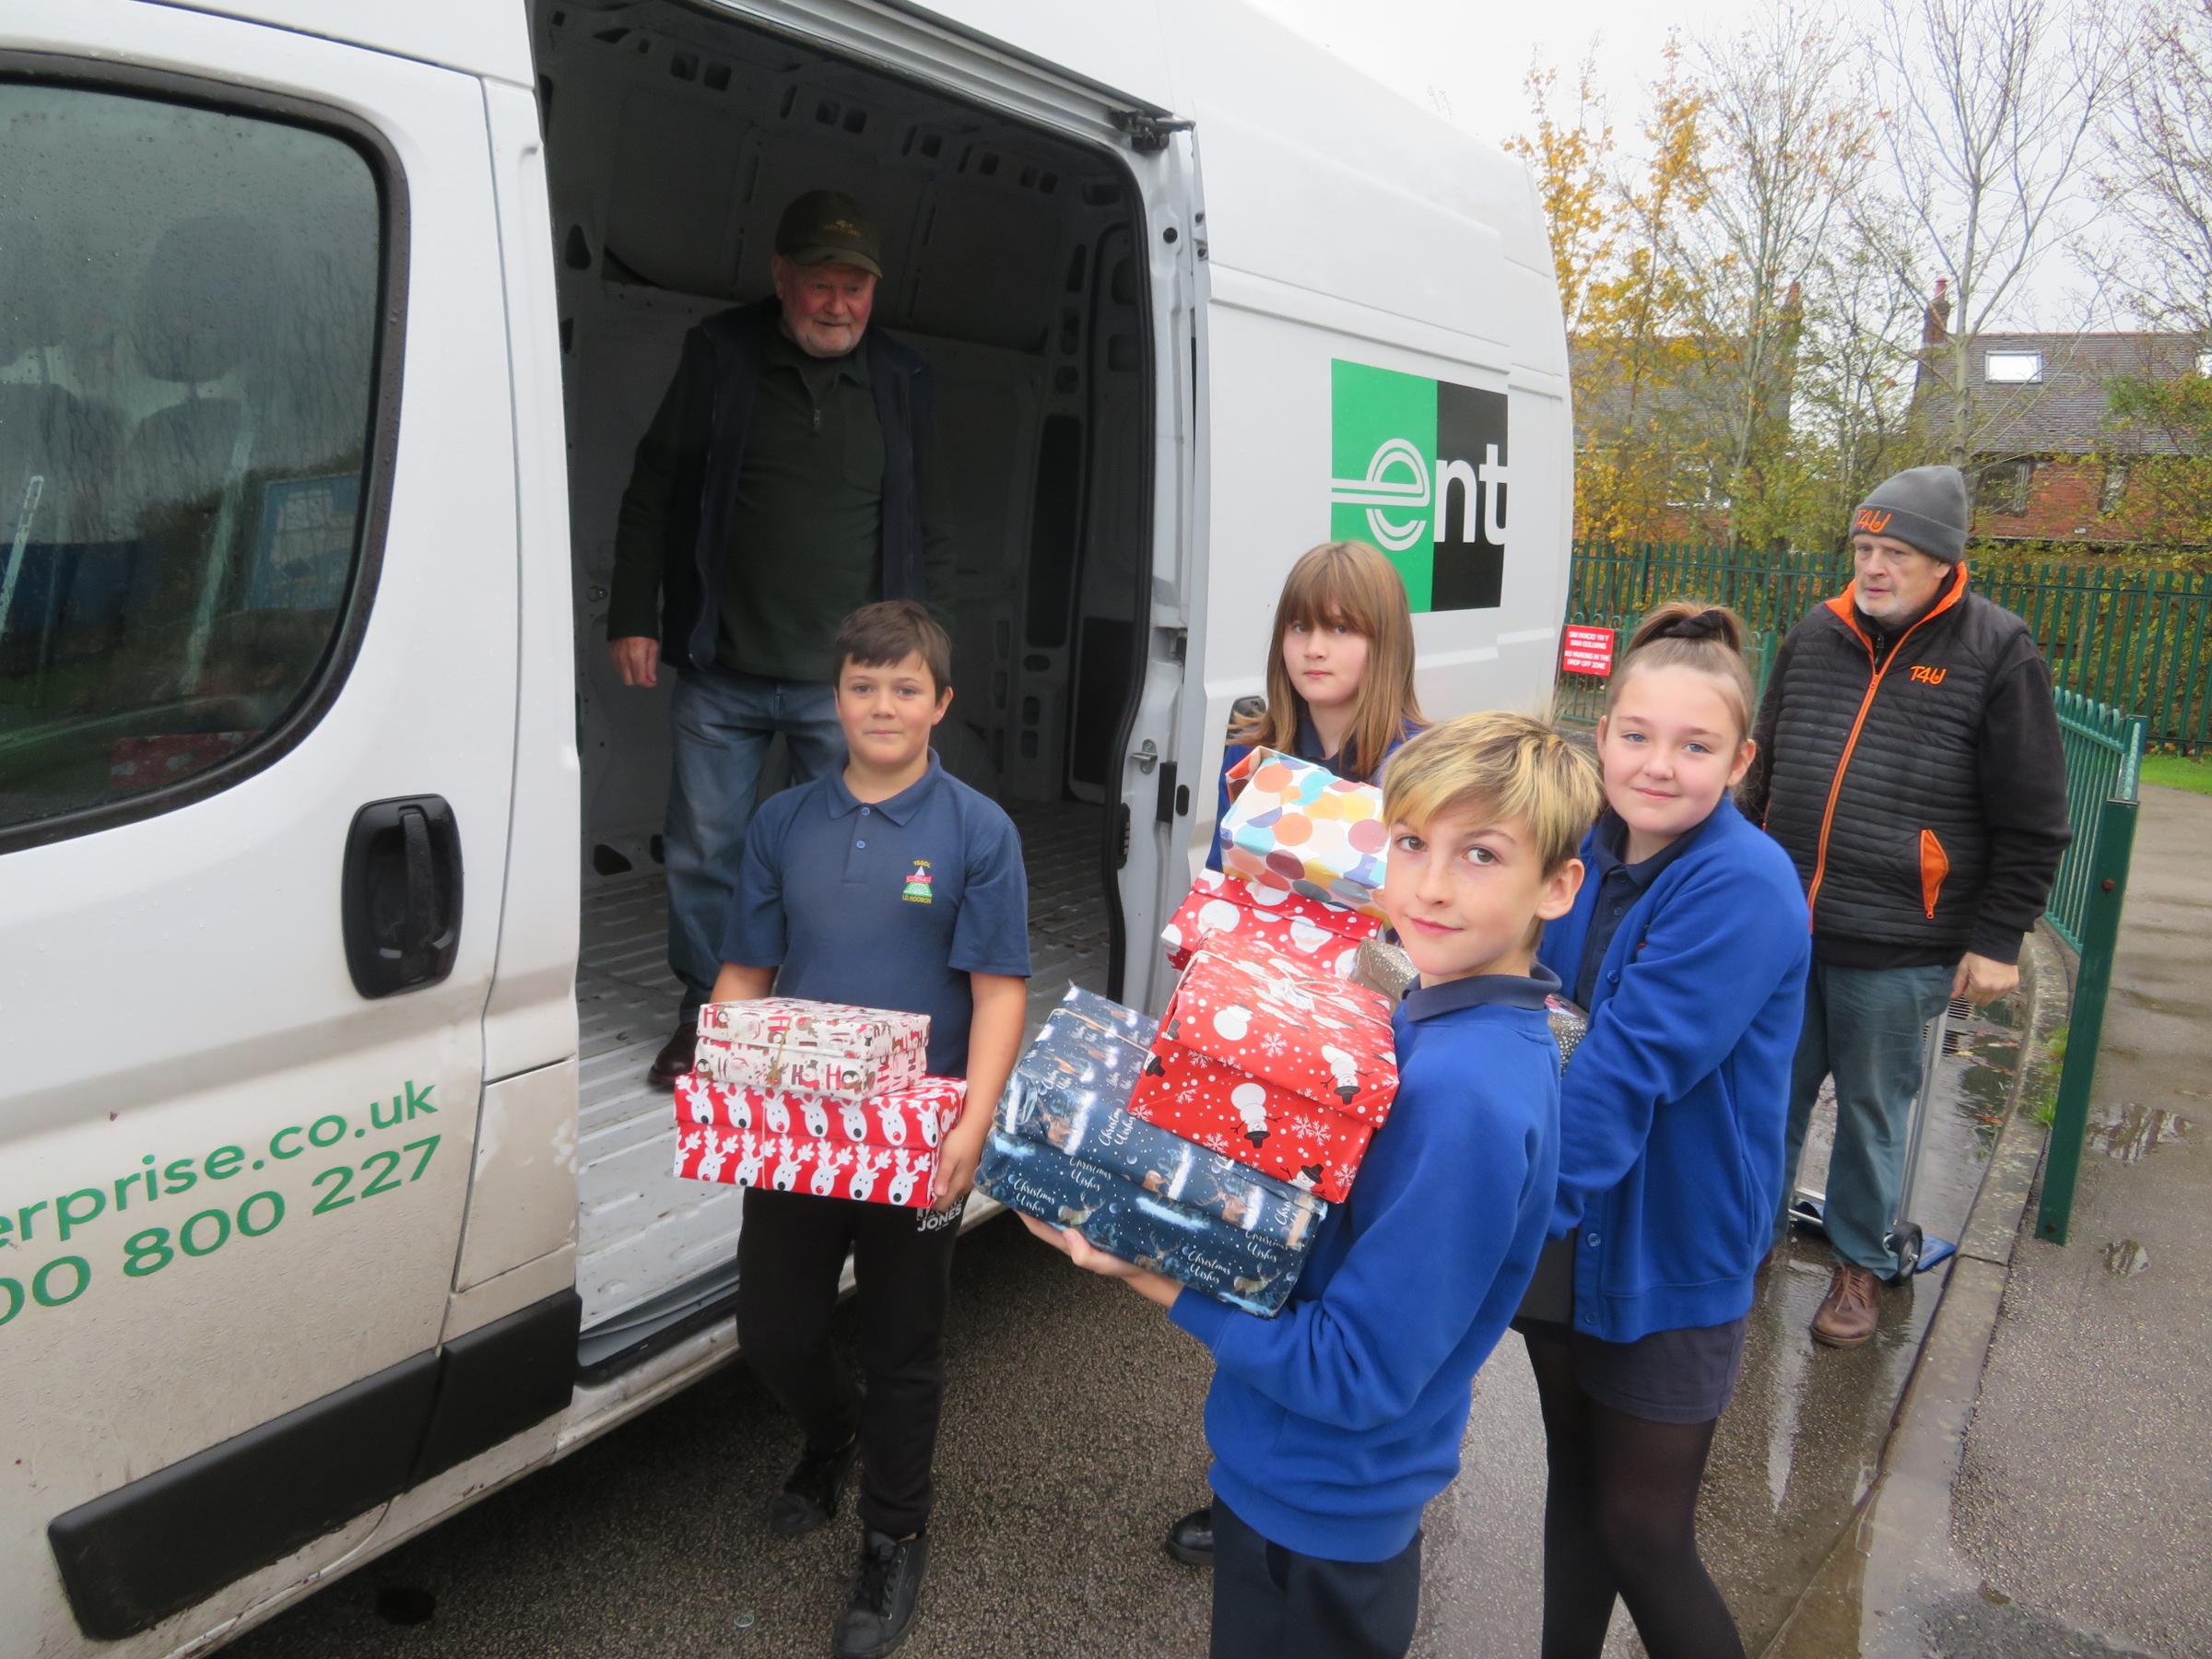 Pupils helping to load the shoeboxes as part of the Teams4U appeal.